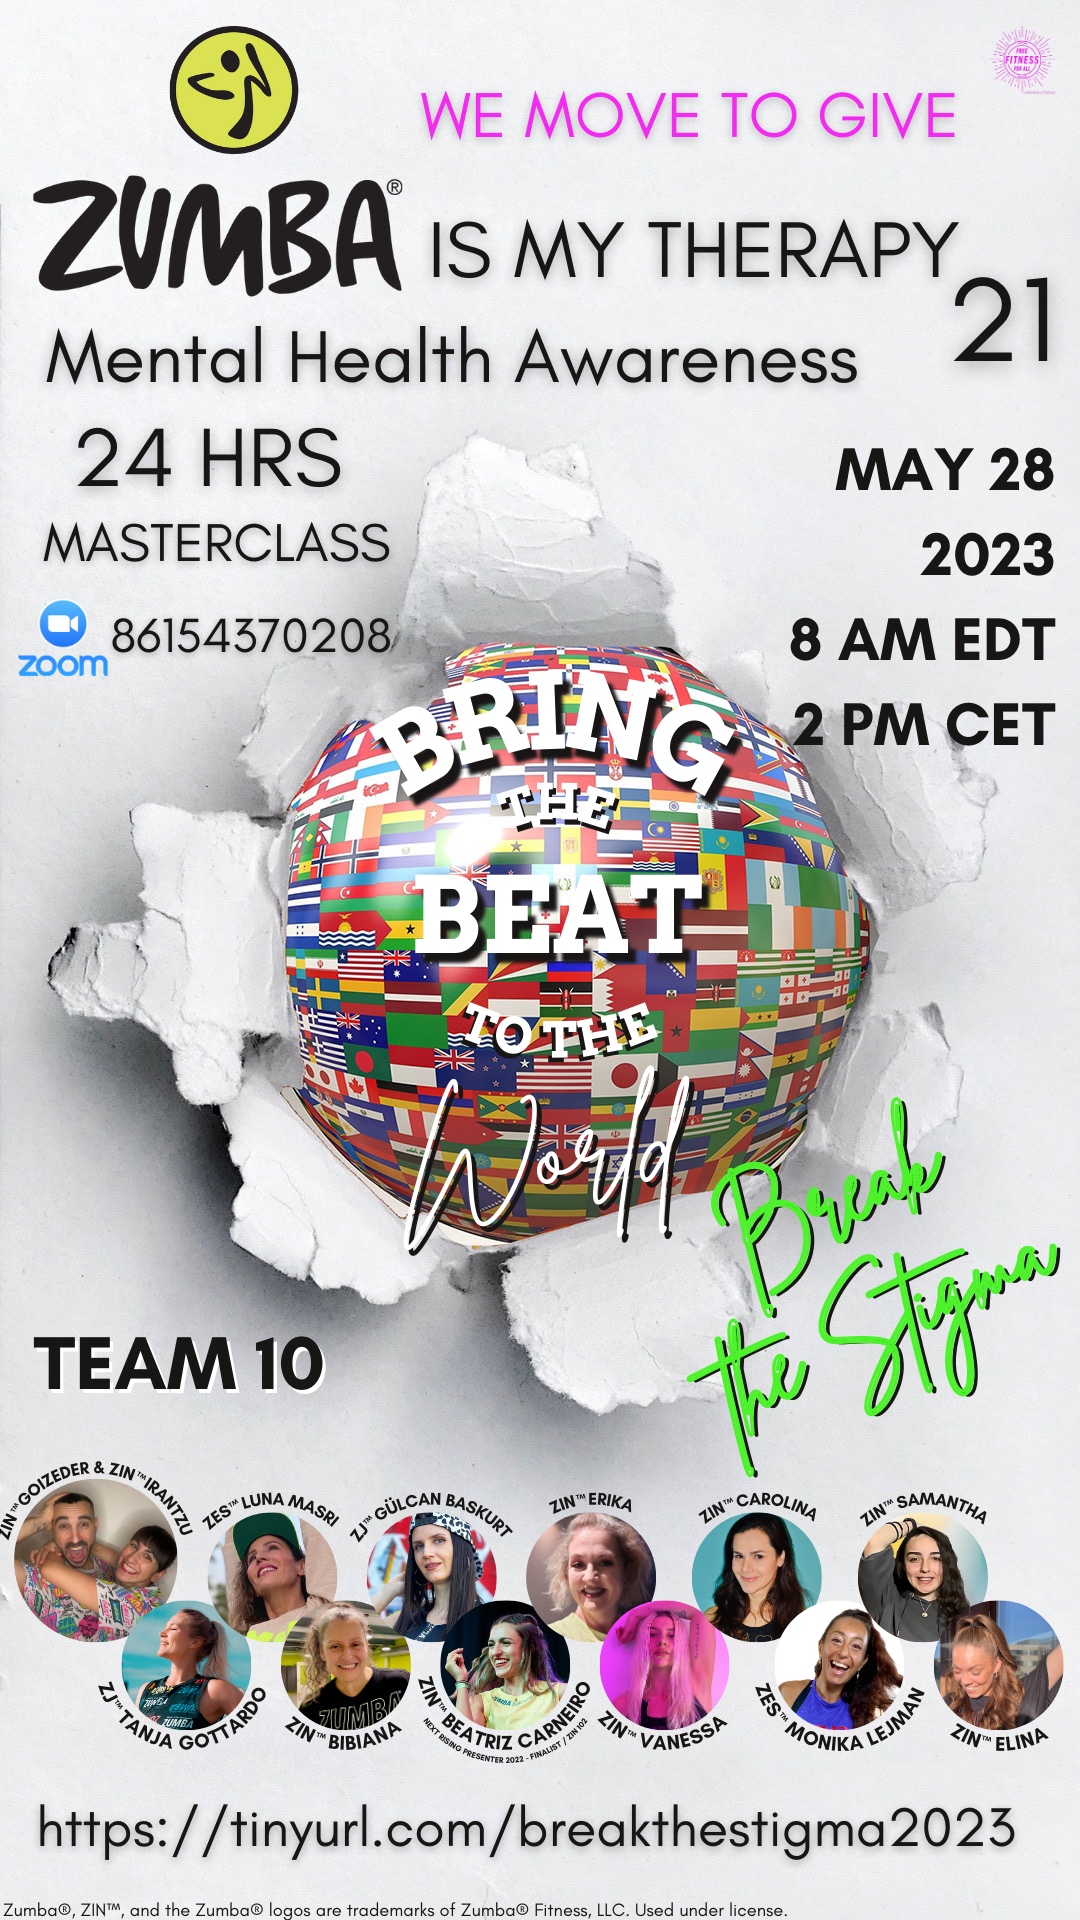 Team 10 - May 28th 8 AM EDT